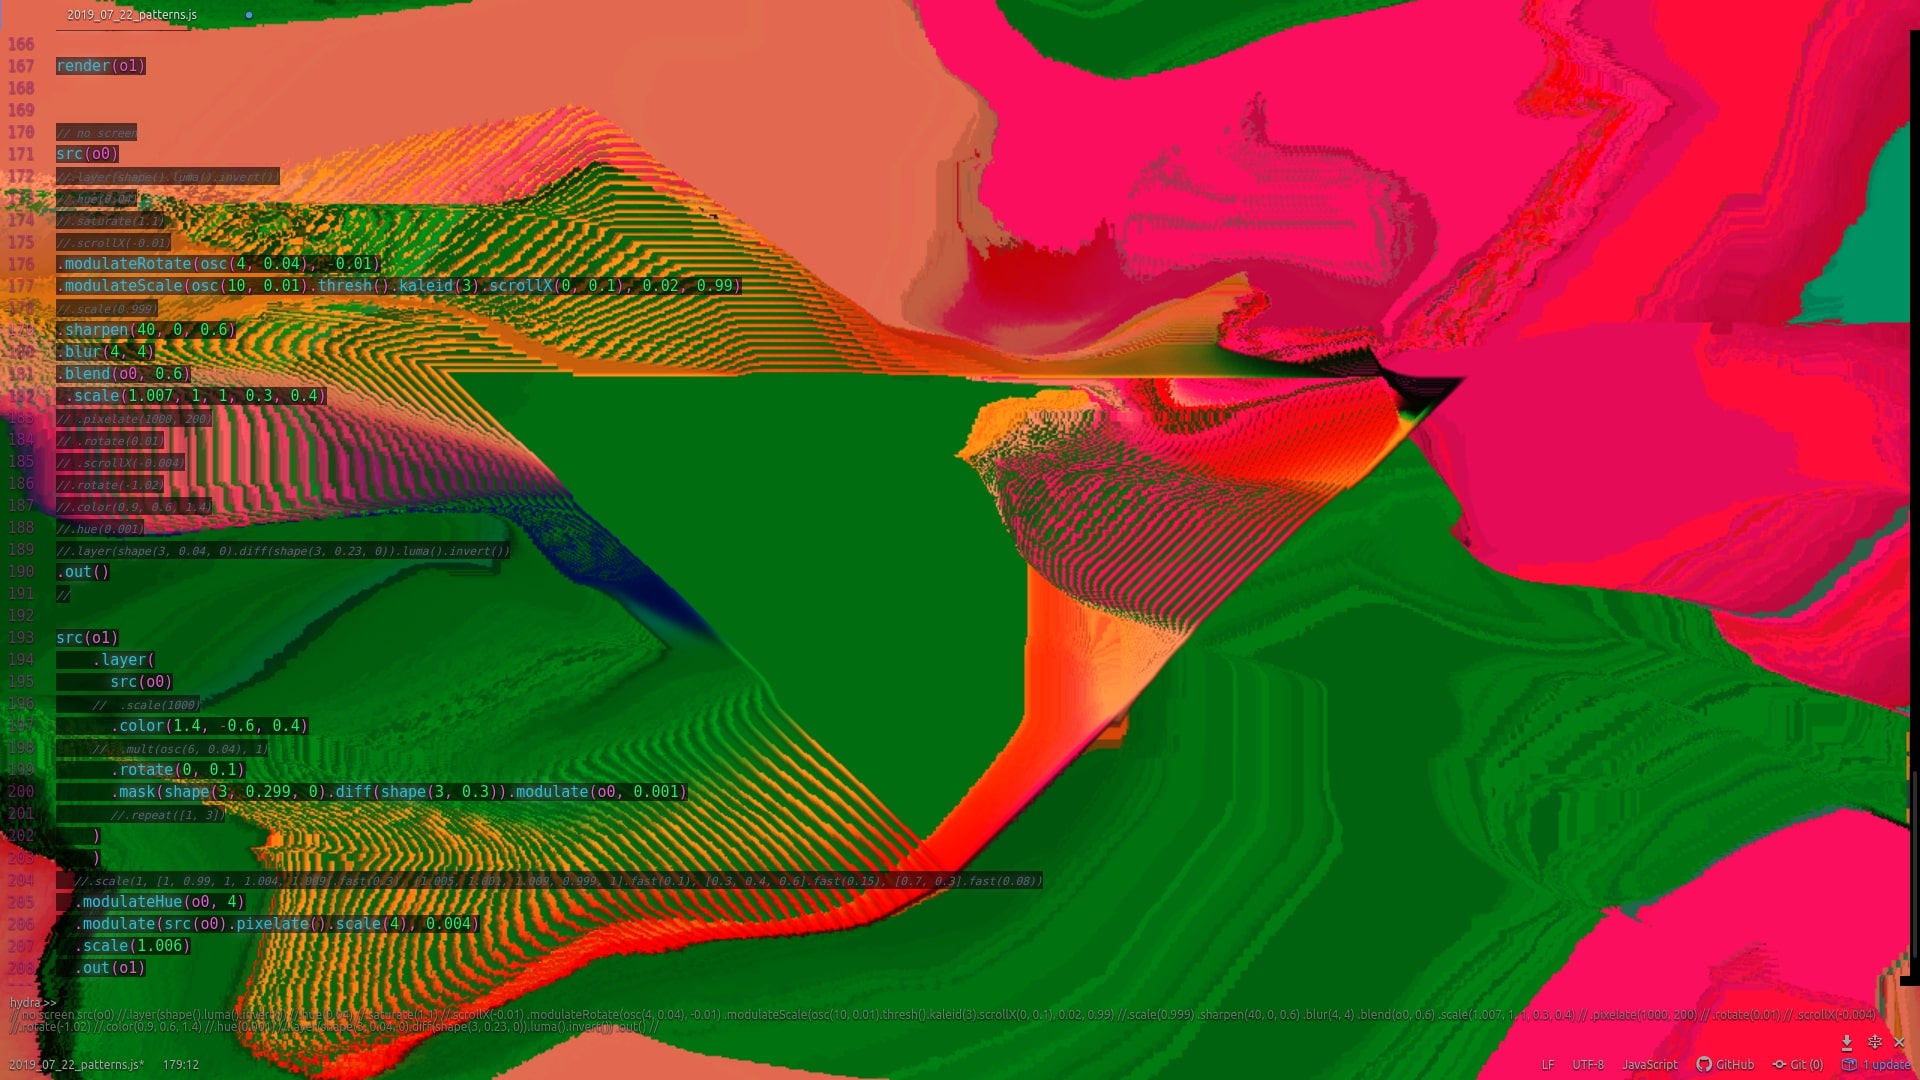 A computer-generated abstract image in greens and pinks with the code used to generate it visible on the left-hand side of the screen